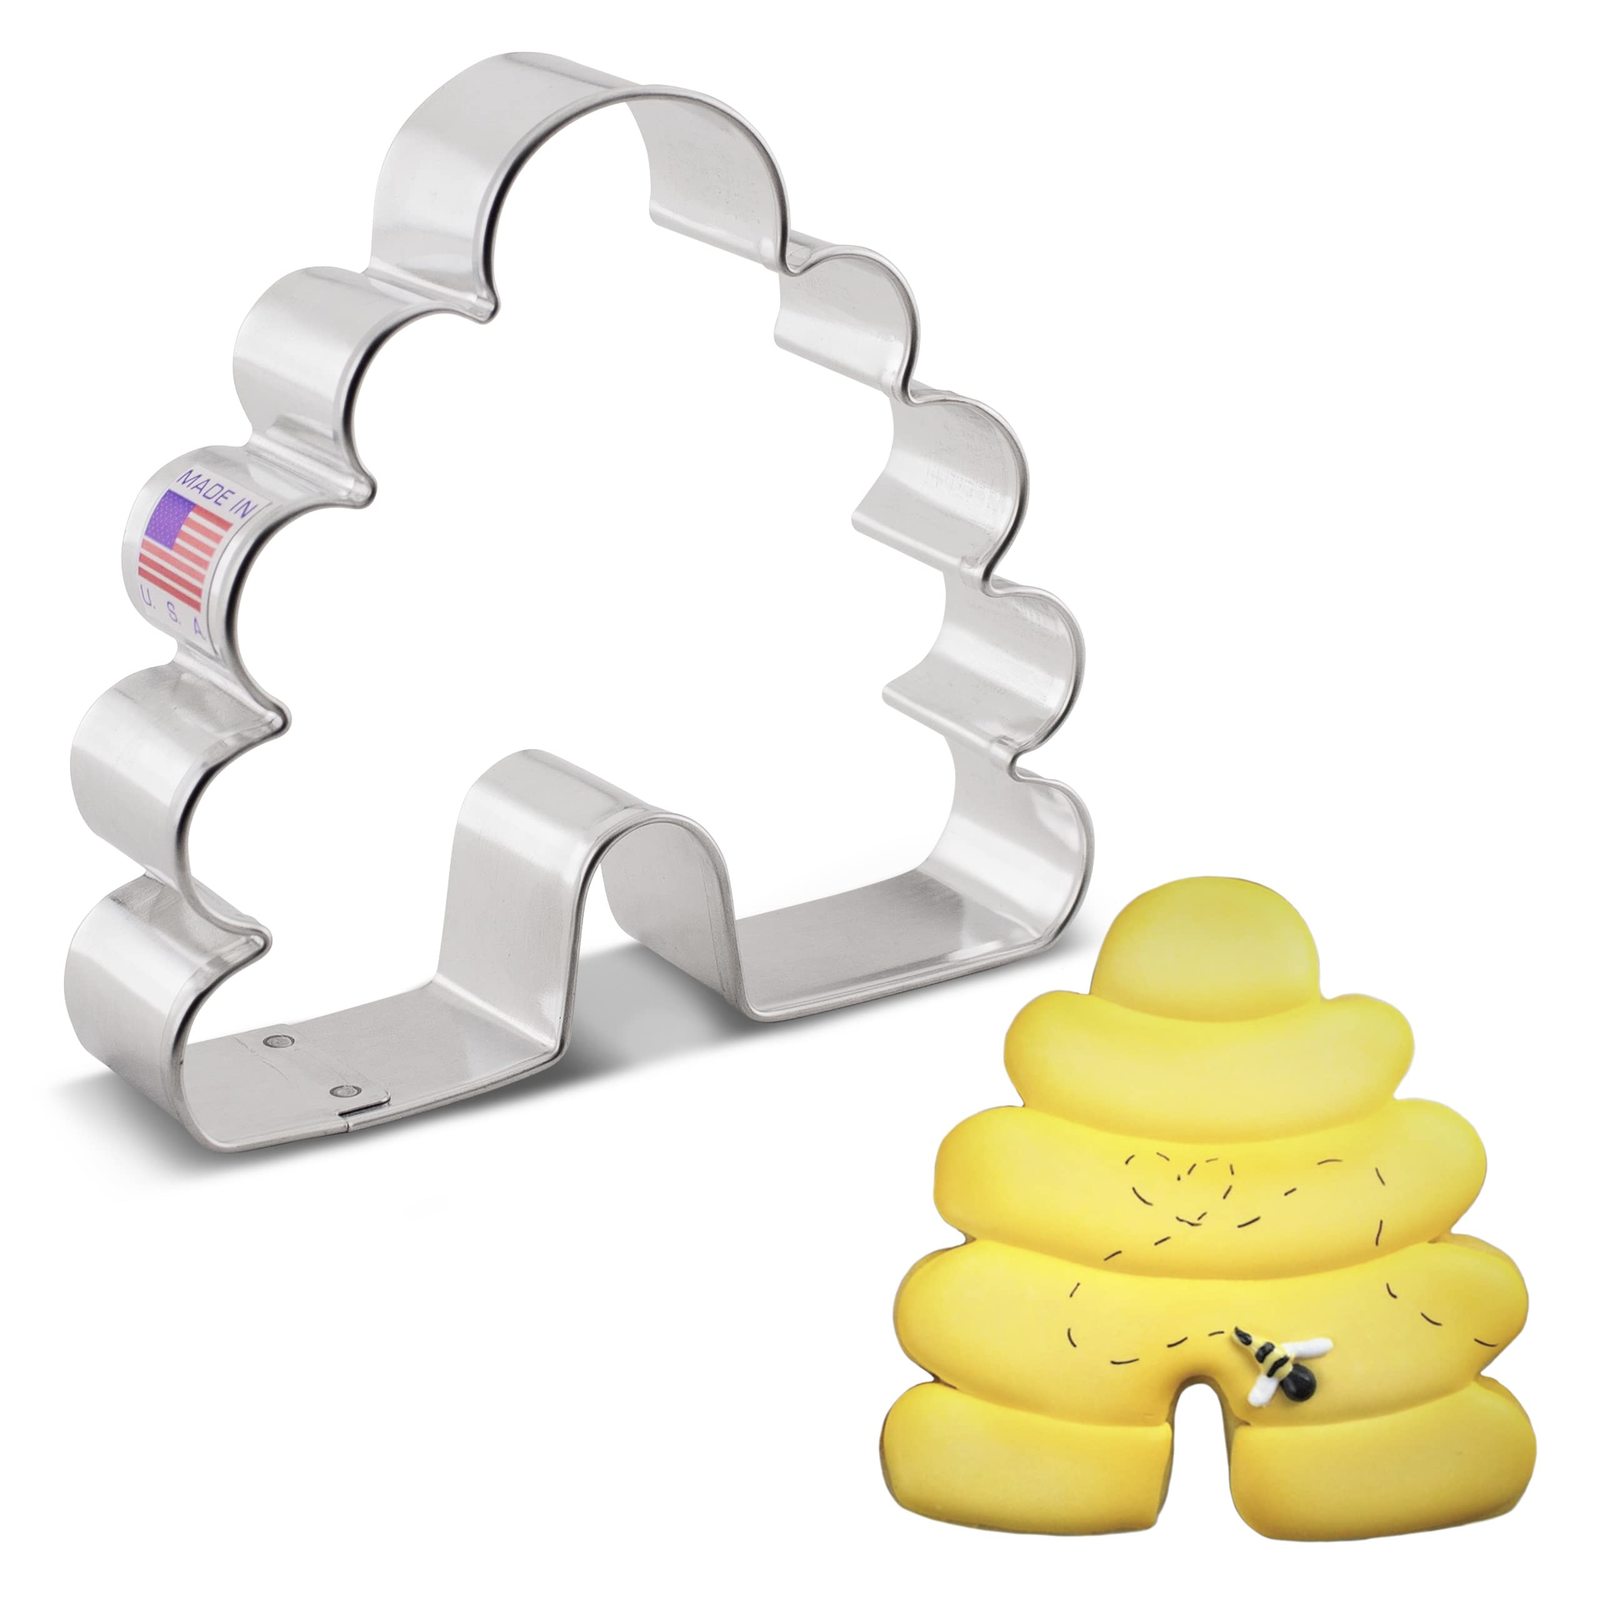 Beehive Cookie Cutter | Made in USA | Ann Clark Cookie Cutters - $5.00